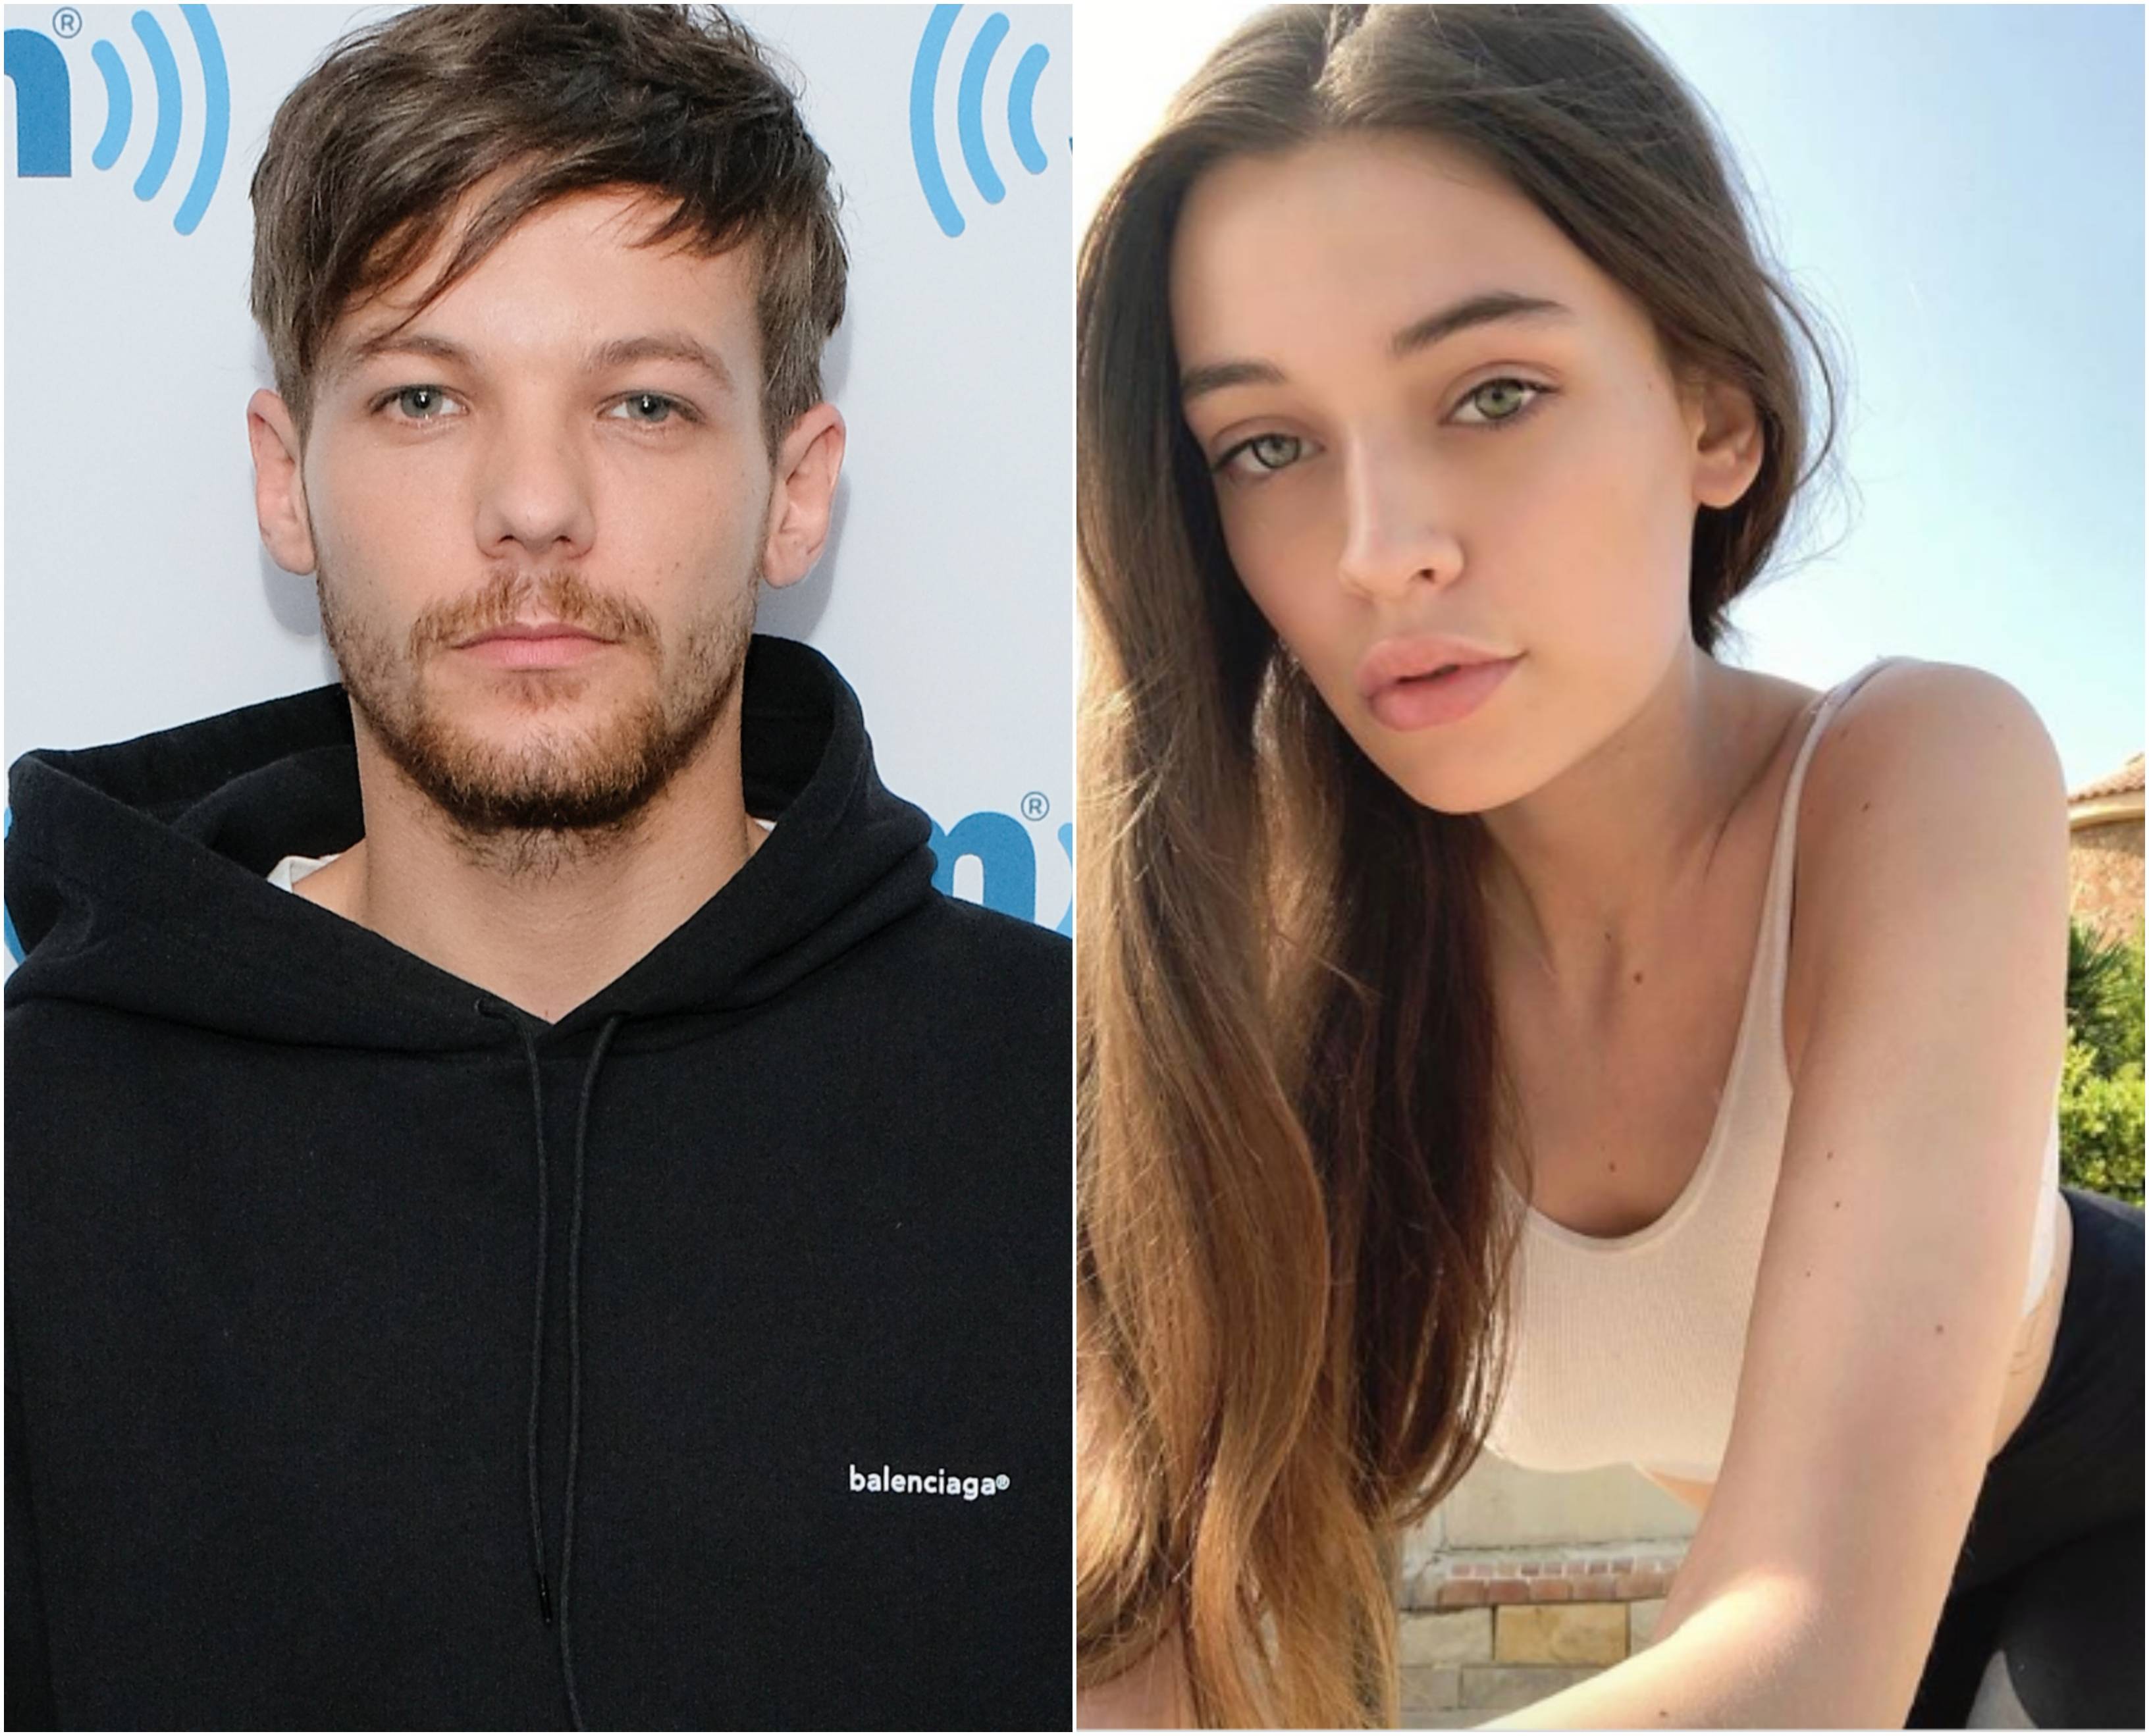 Louis Tomlinson New Song: 'Two of Us' Lyrics About Mom's Death